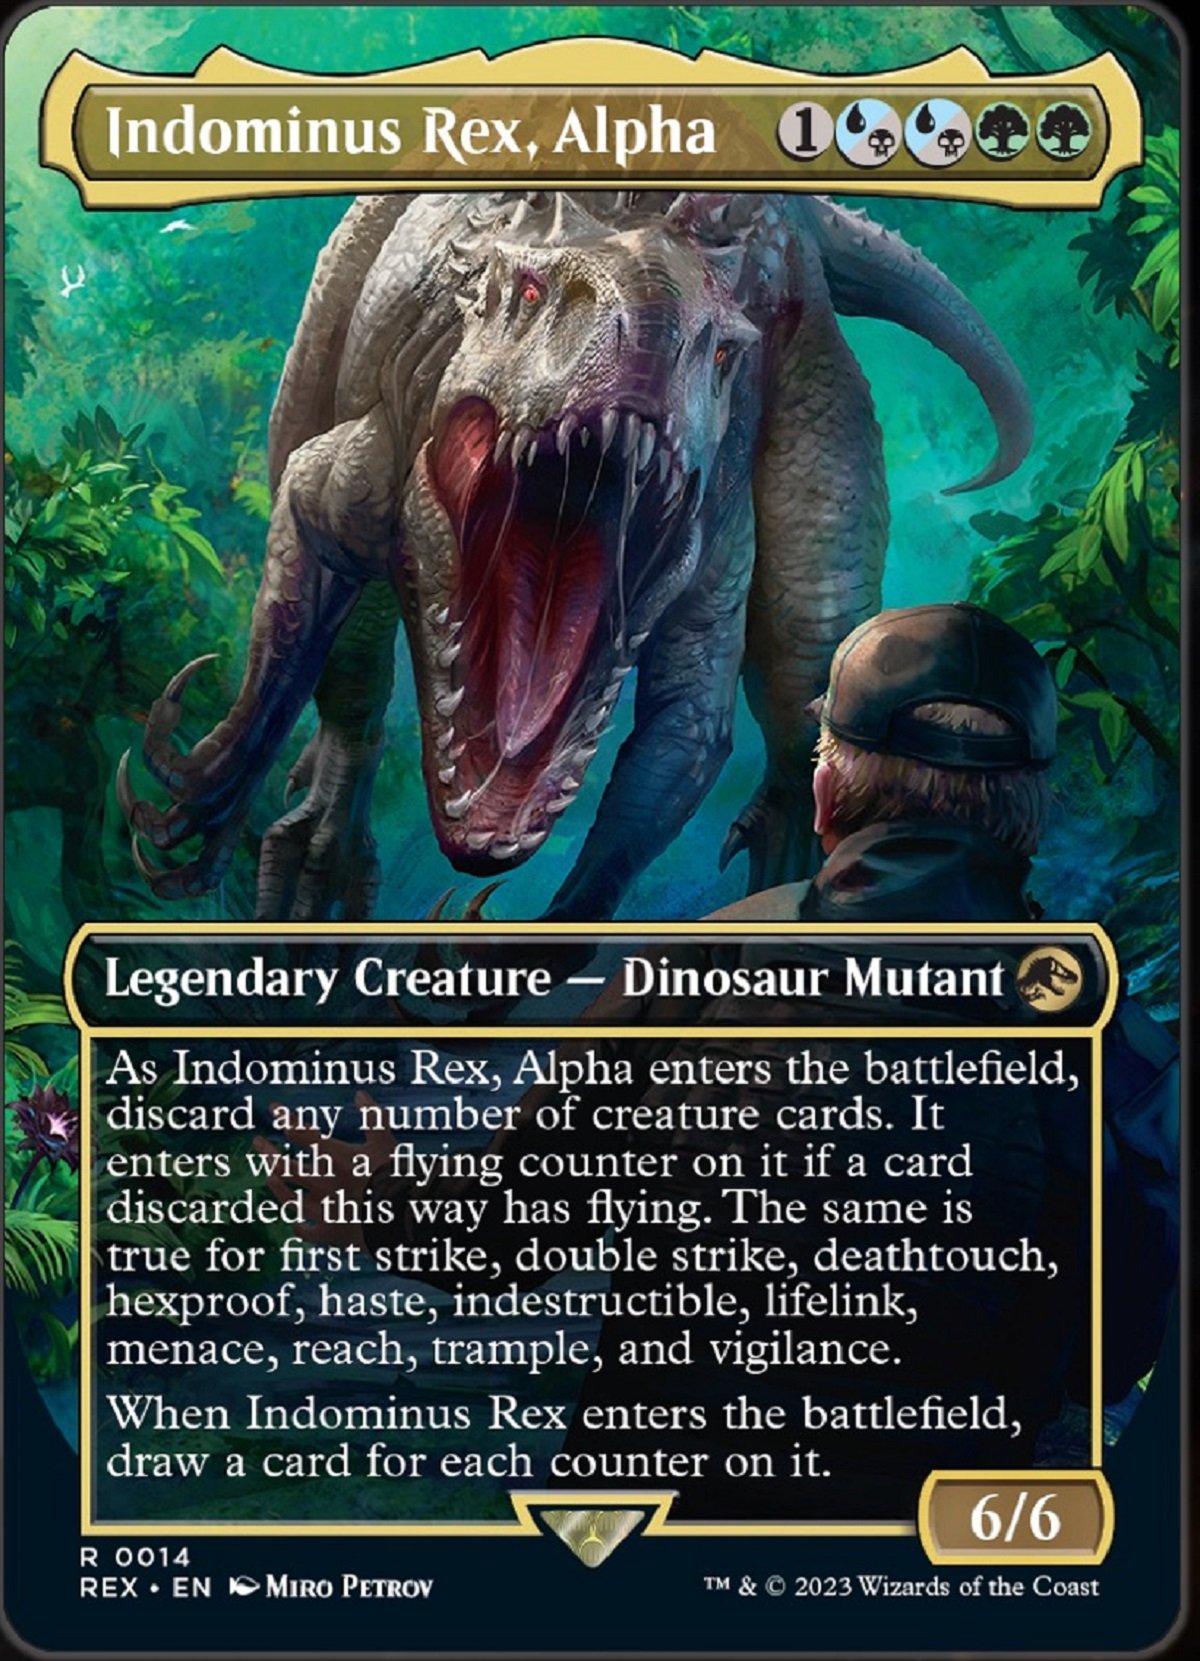 Wizards of the Coast's new Jurassic Park Dr. Indominus Rex Magic: The Gathering card.